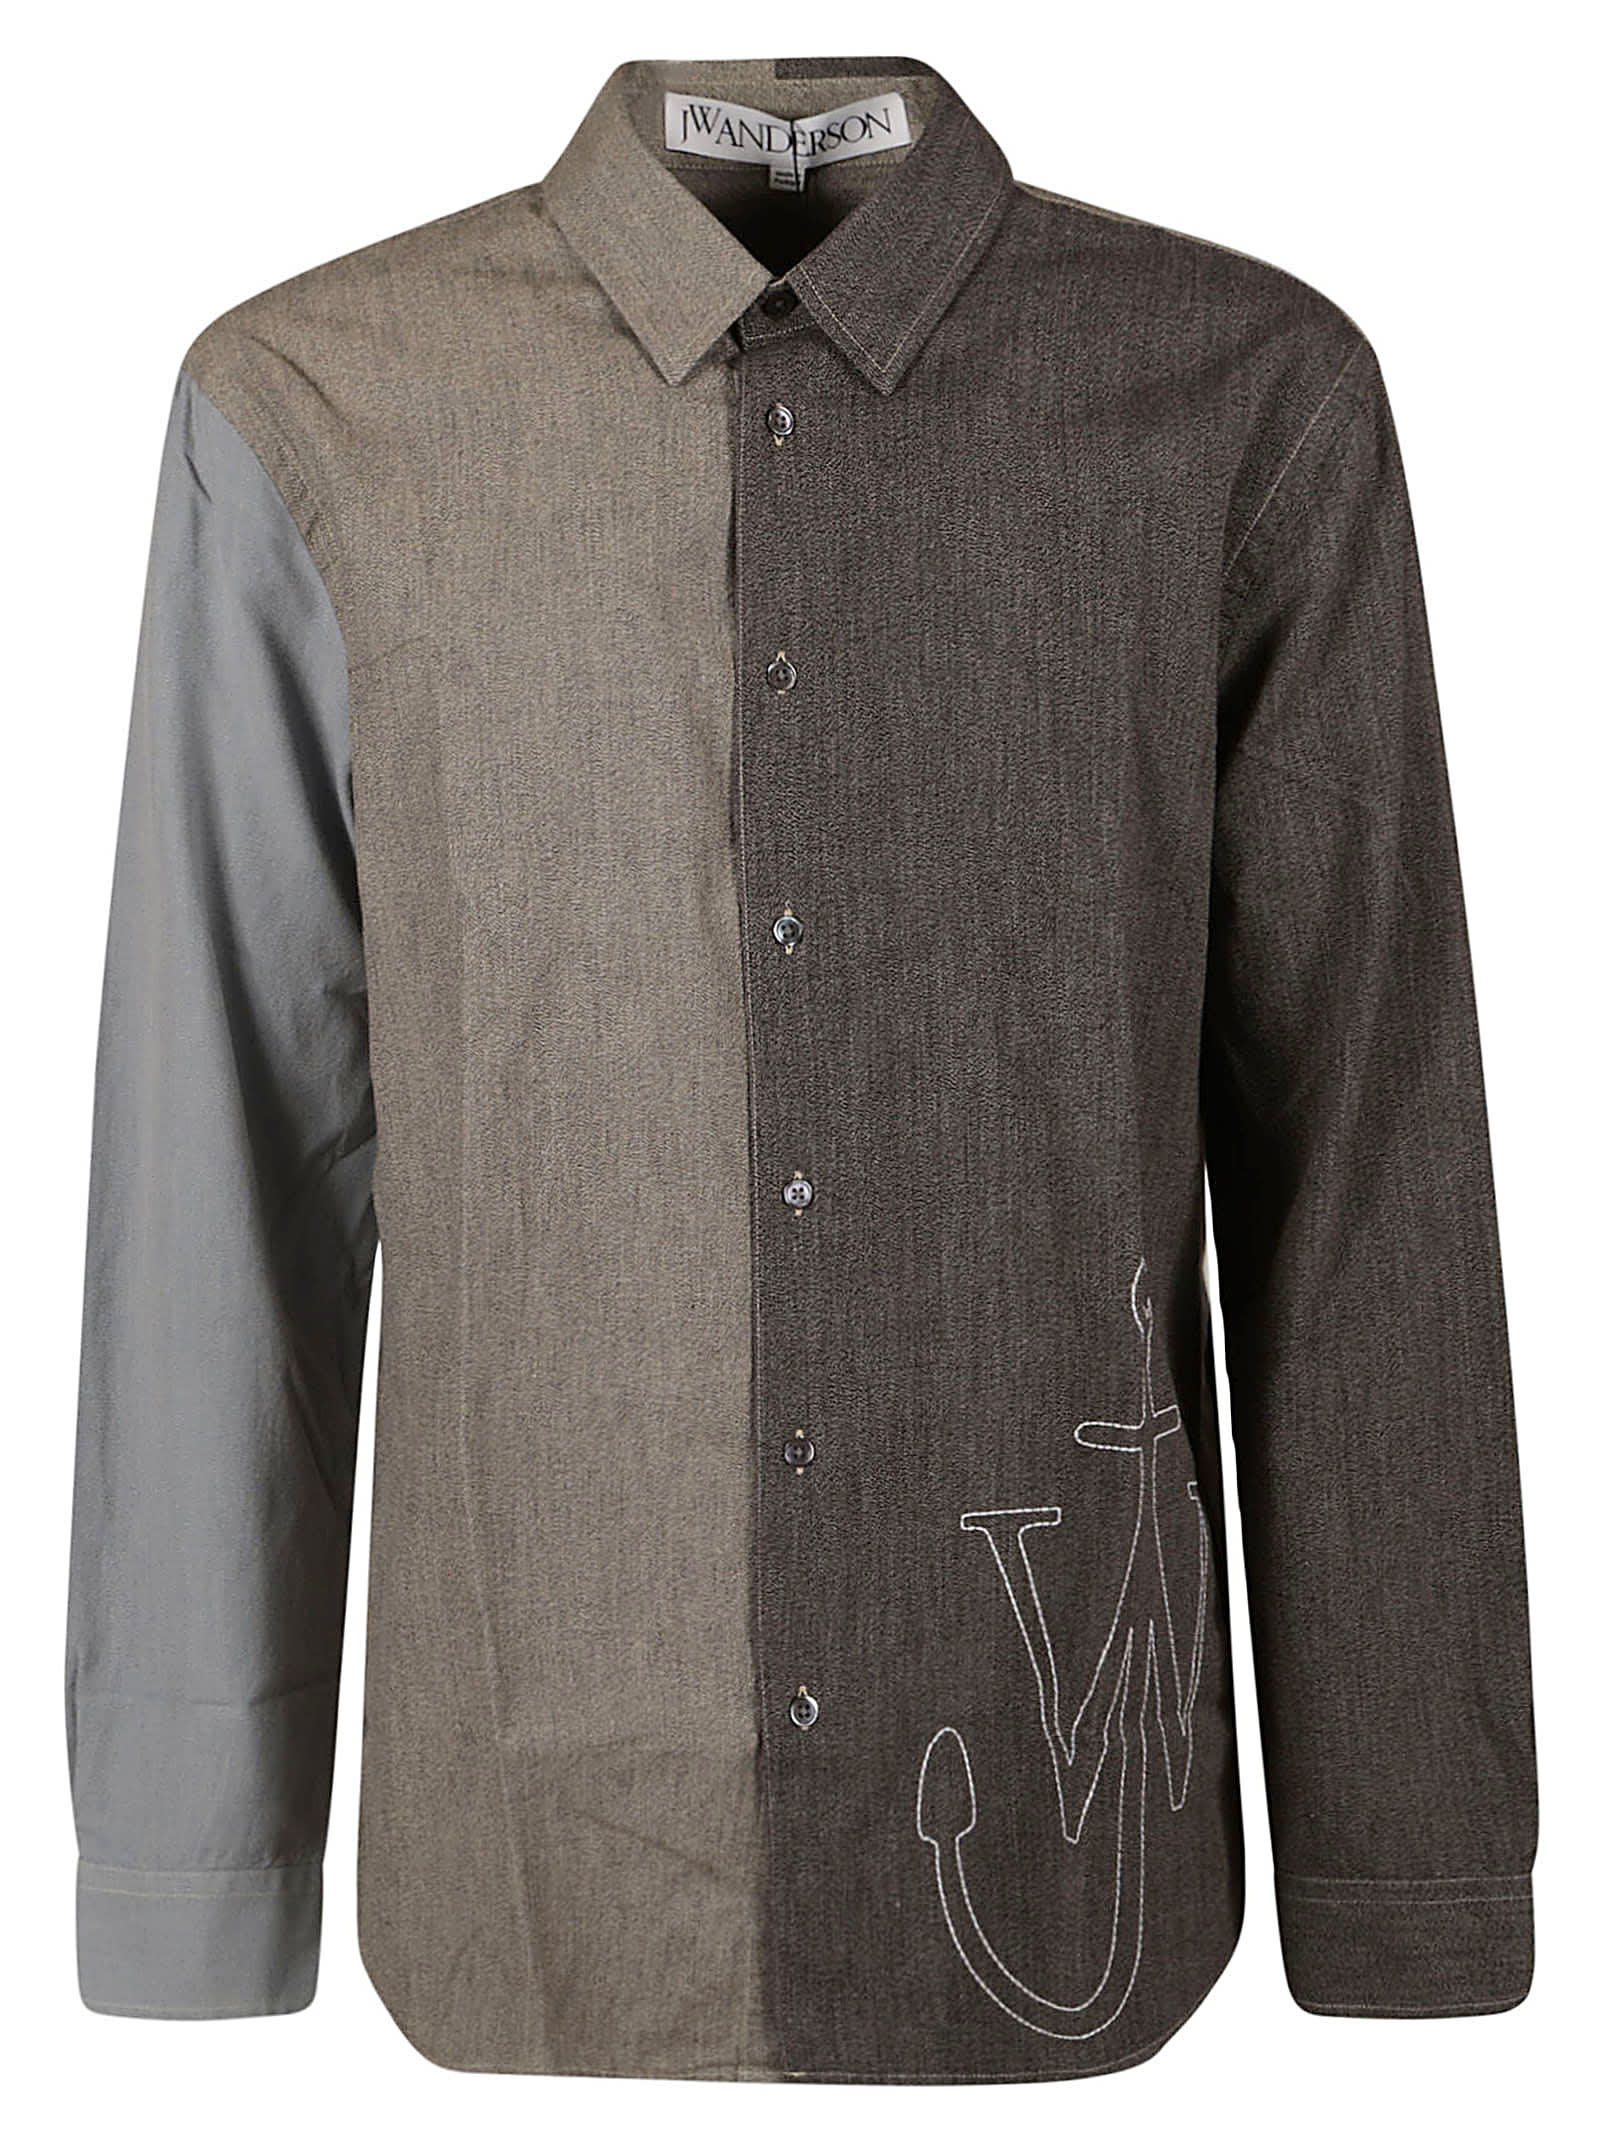 Jw Anderson Anchor Classic Fit Patchwork Shirt In Grey/multicolor